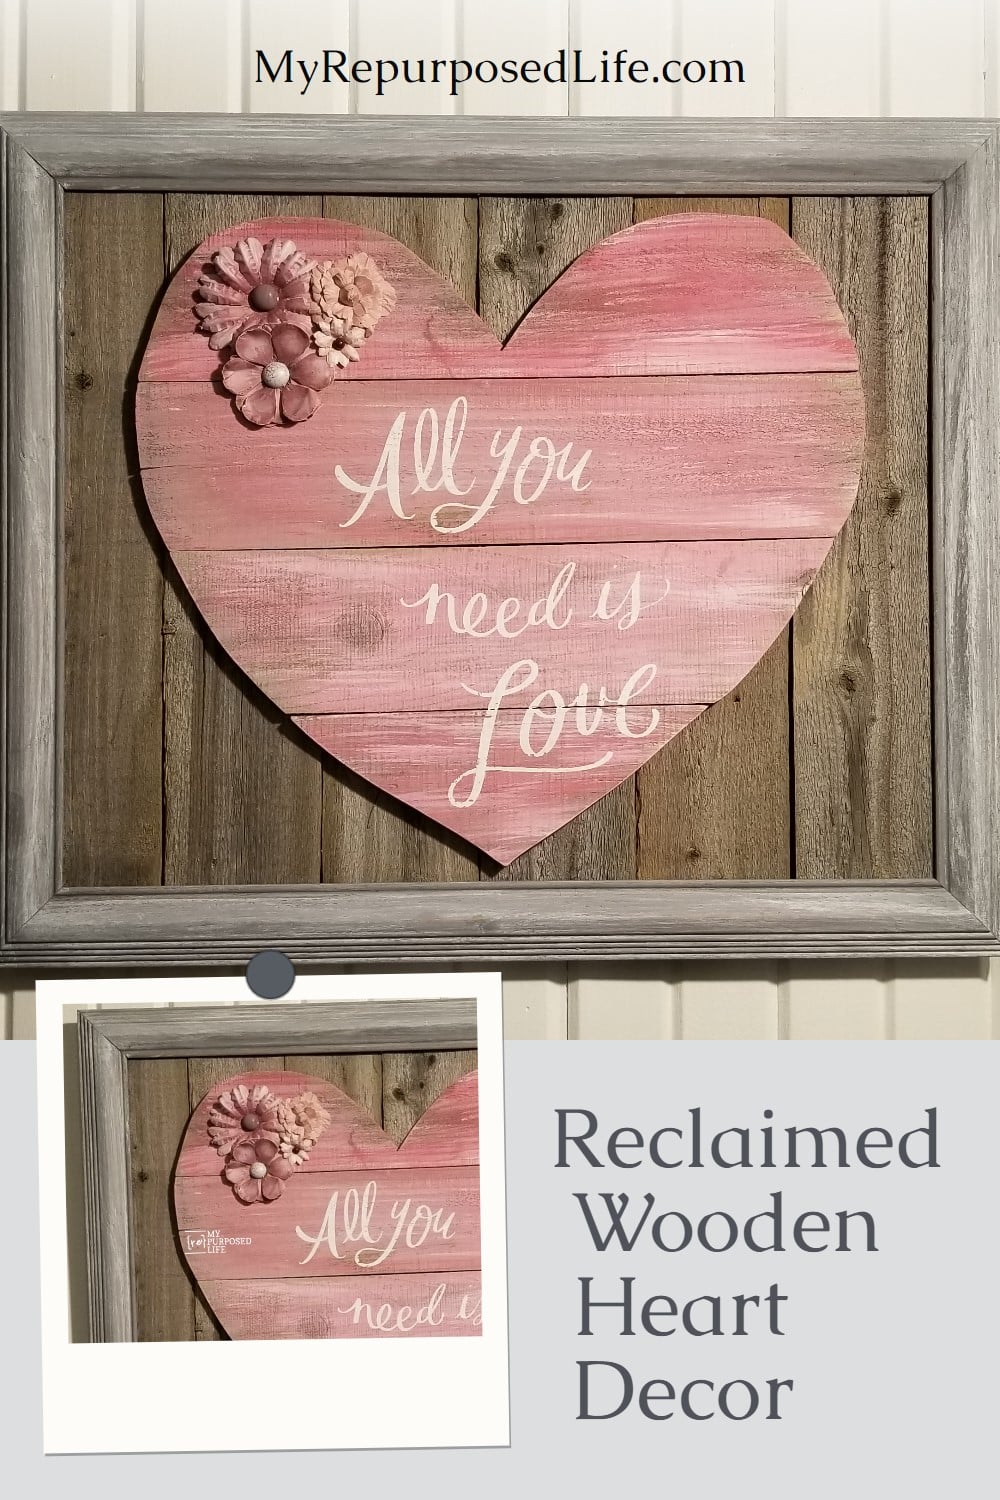 How to make a reclaimed wood heart out of weathered fence boards. You could easily use pallet boards instead. Step by step directions for you to follow. Make one for someone you love today! #MyRepurposedLife #repurposed #reclaimed #wood #valentinesday #love via @repurposedlife